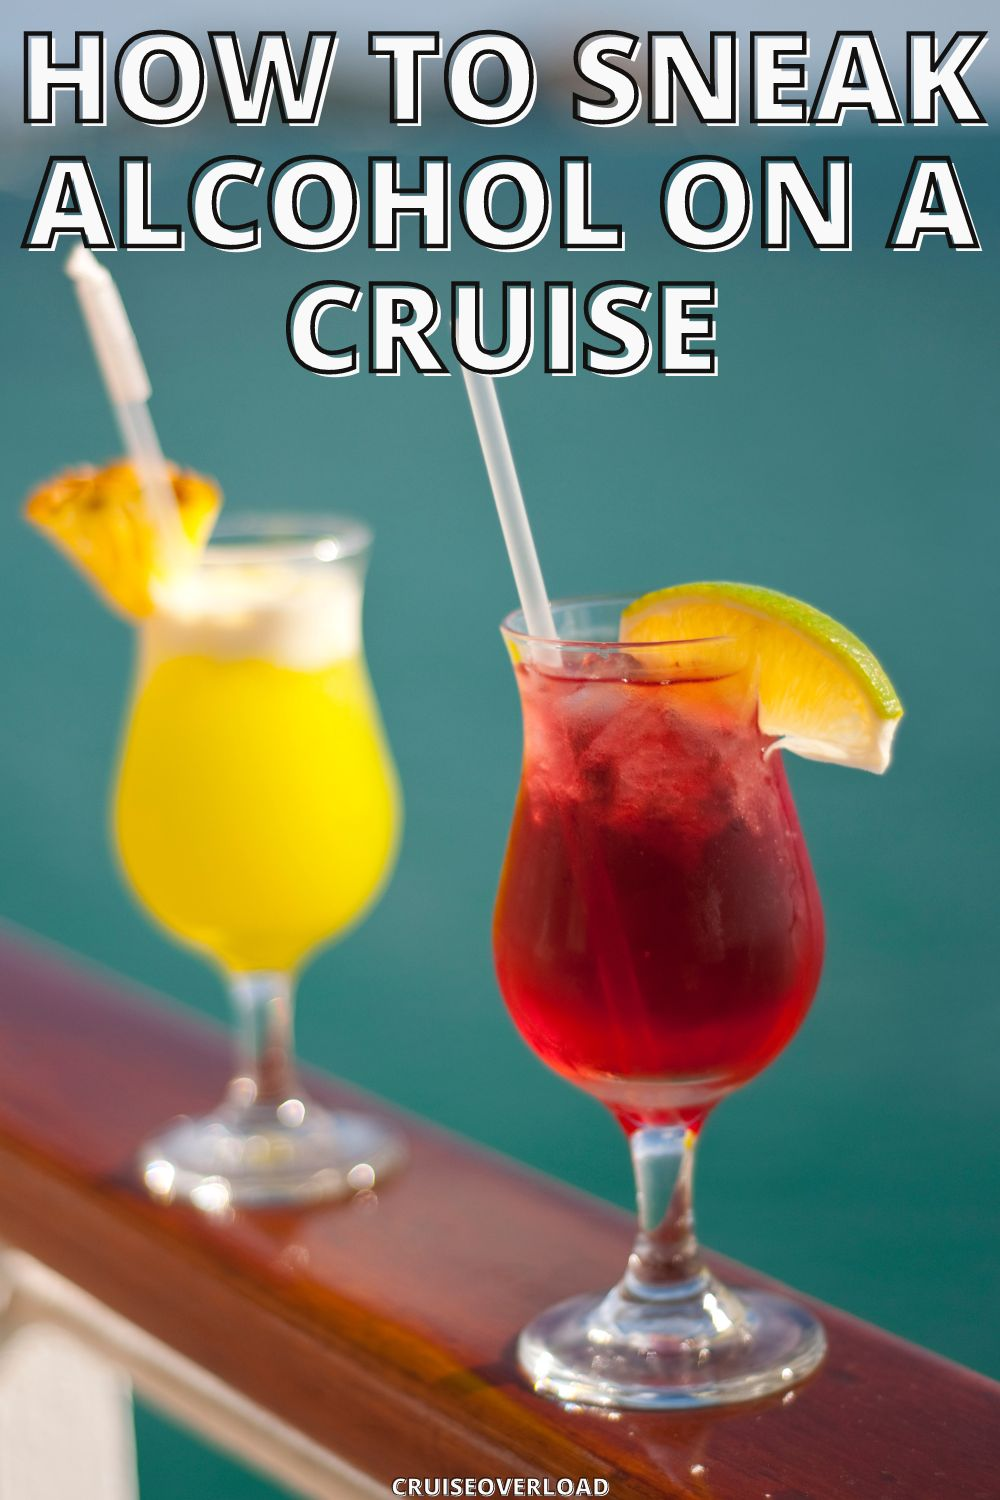 how to sneak alcohol on a cruise 2022 reddit